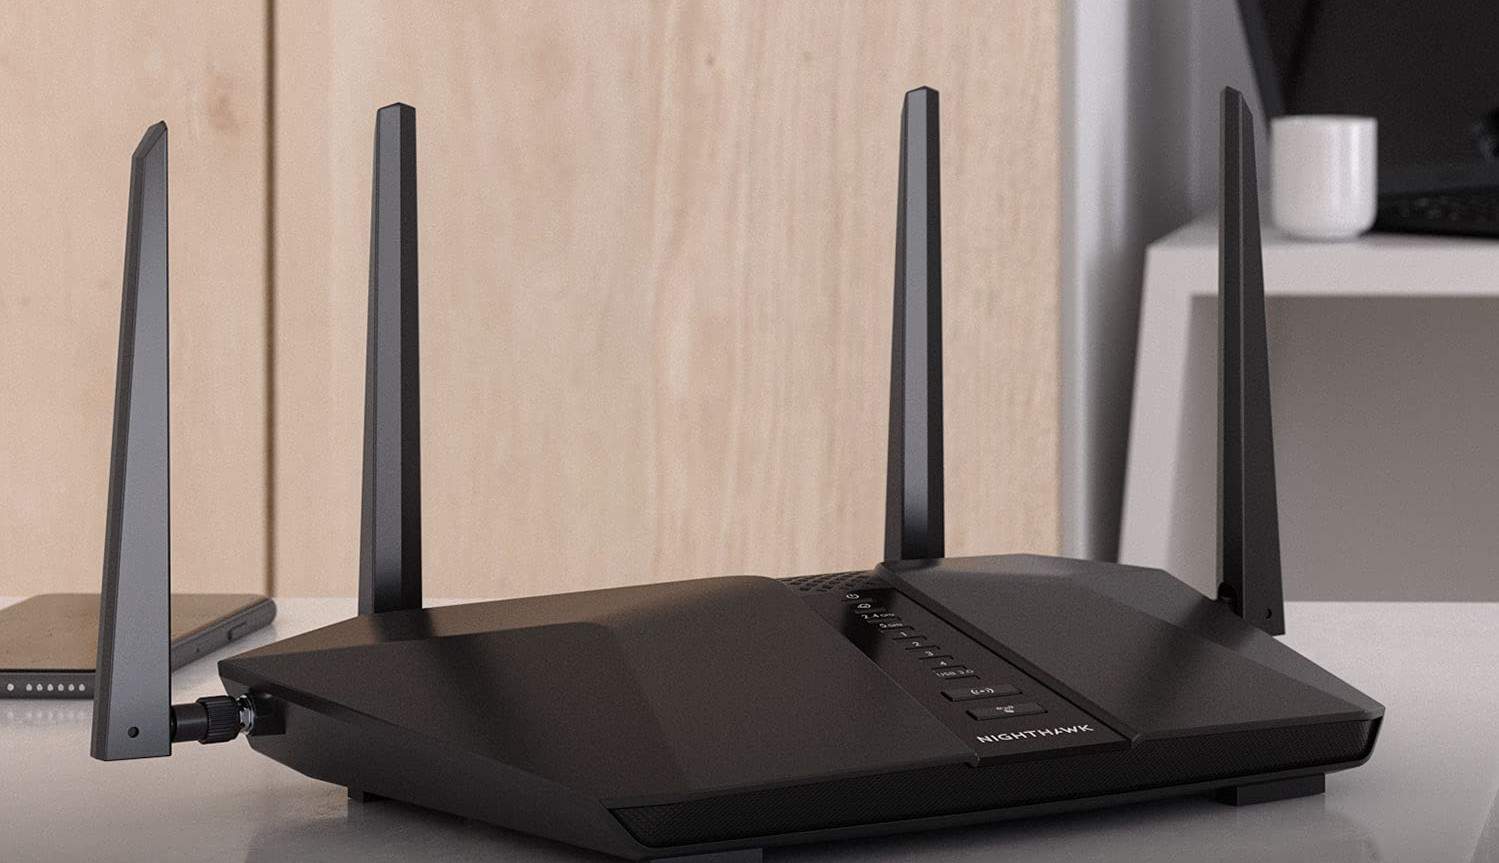 Will Any Router Work With Any Modem?